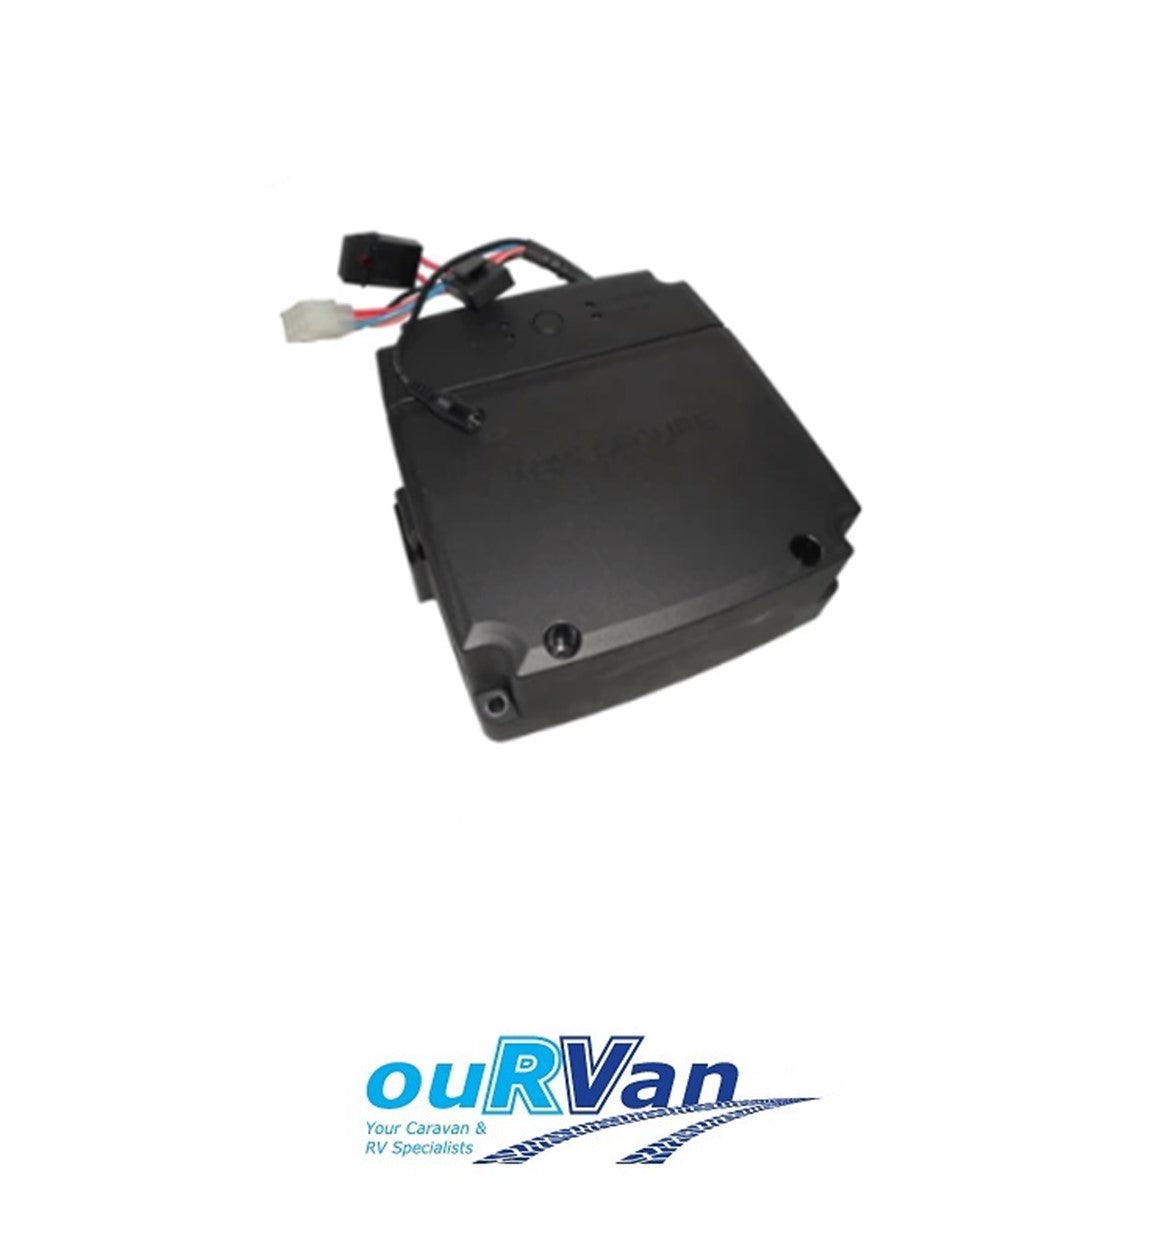 Tow Secure Breakaway System - Control Module Only - Cm 1000 350-01504 Controller